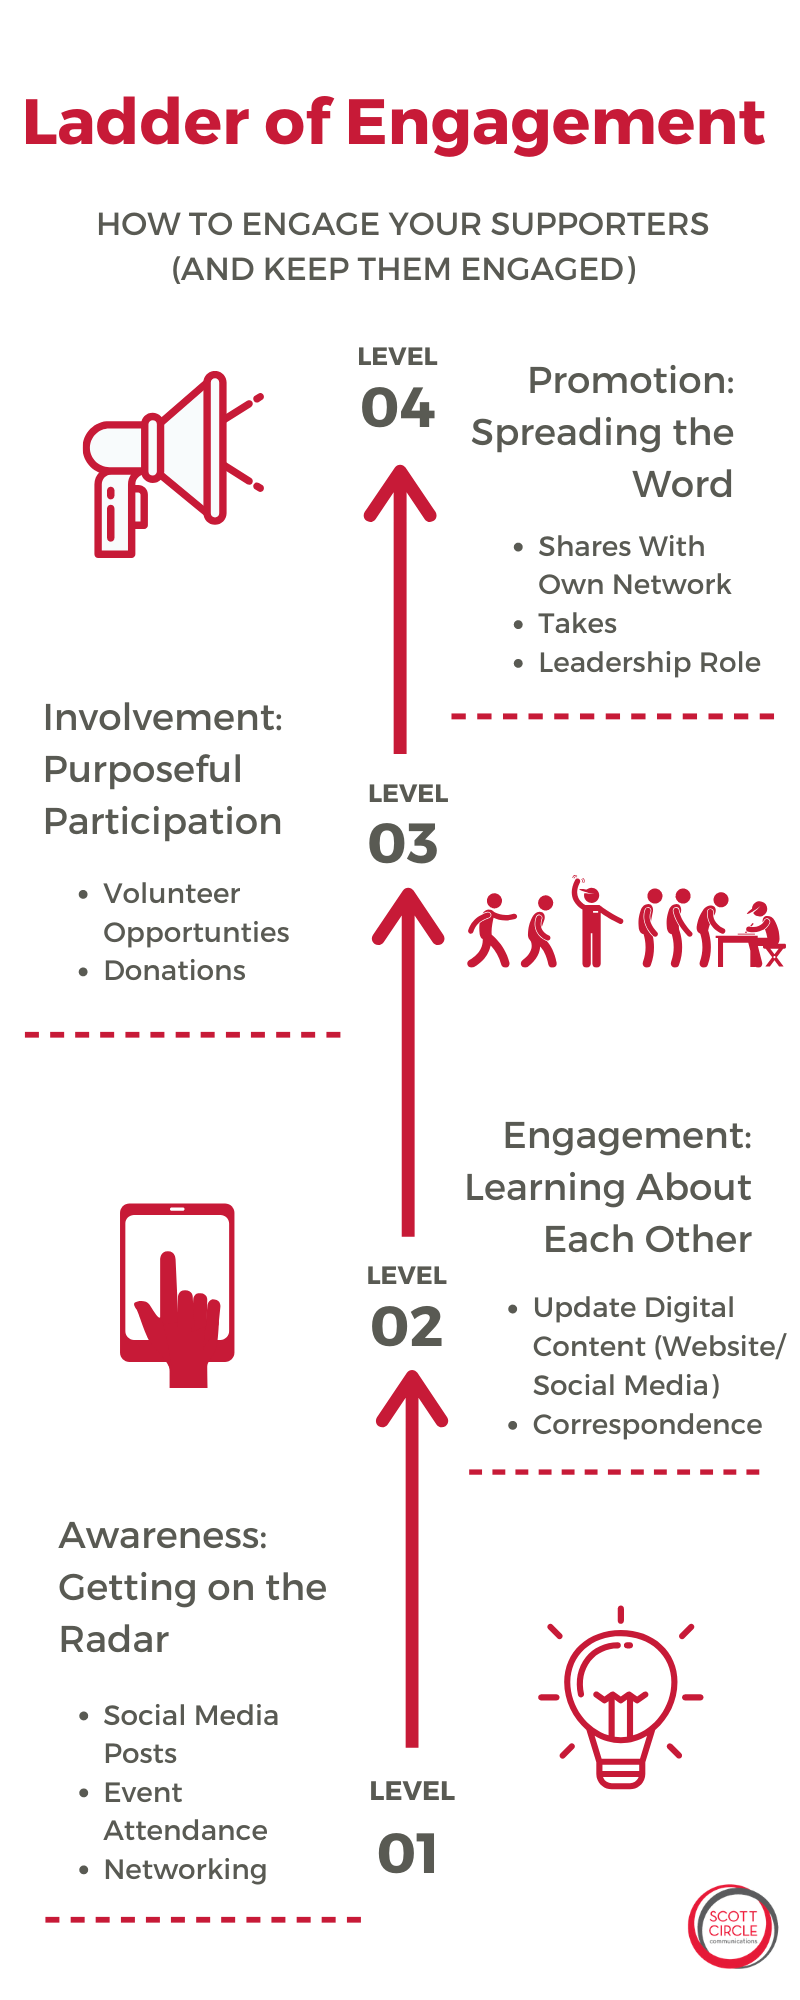 Infographic outlining steps for building a ladder of engagement. Starting at the top, they are: Level 04. Promotion: Spread the Word. Shares with own network, takes leadership role. Level 03. Involvement: Purposeful Participation. Volunteer opportunities, donations. Level 02. Engagement: Learning About Each Other. Update digital content (website/social media), correspondence. Level 01. Awareness: Getting on the radar. Social media posts, event attendance, networking.